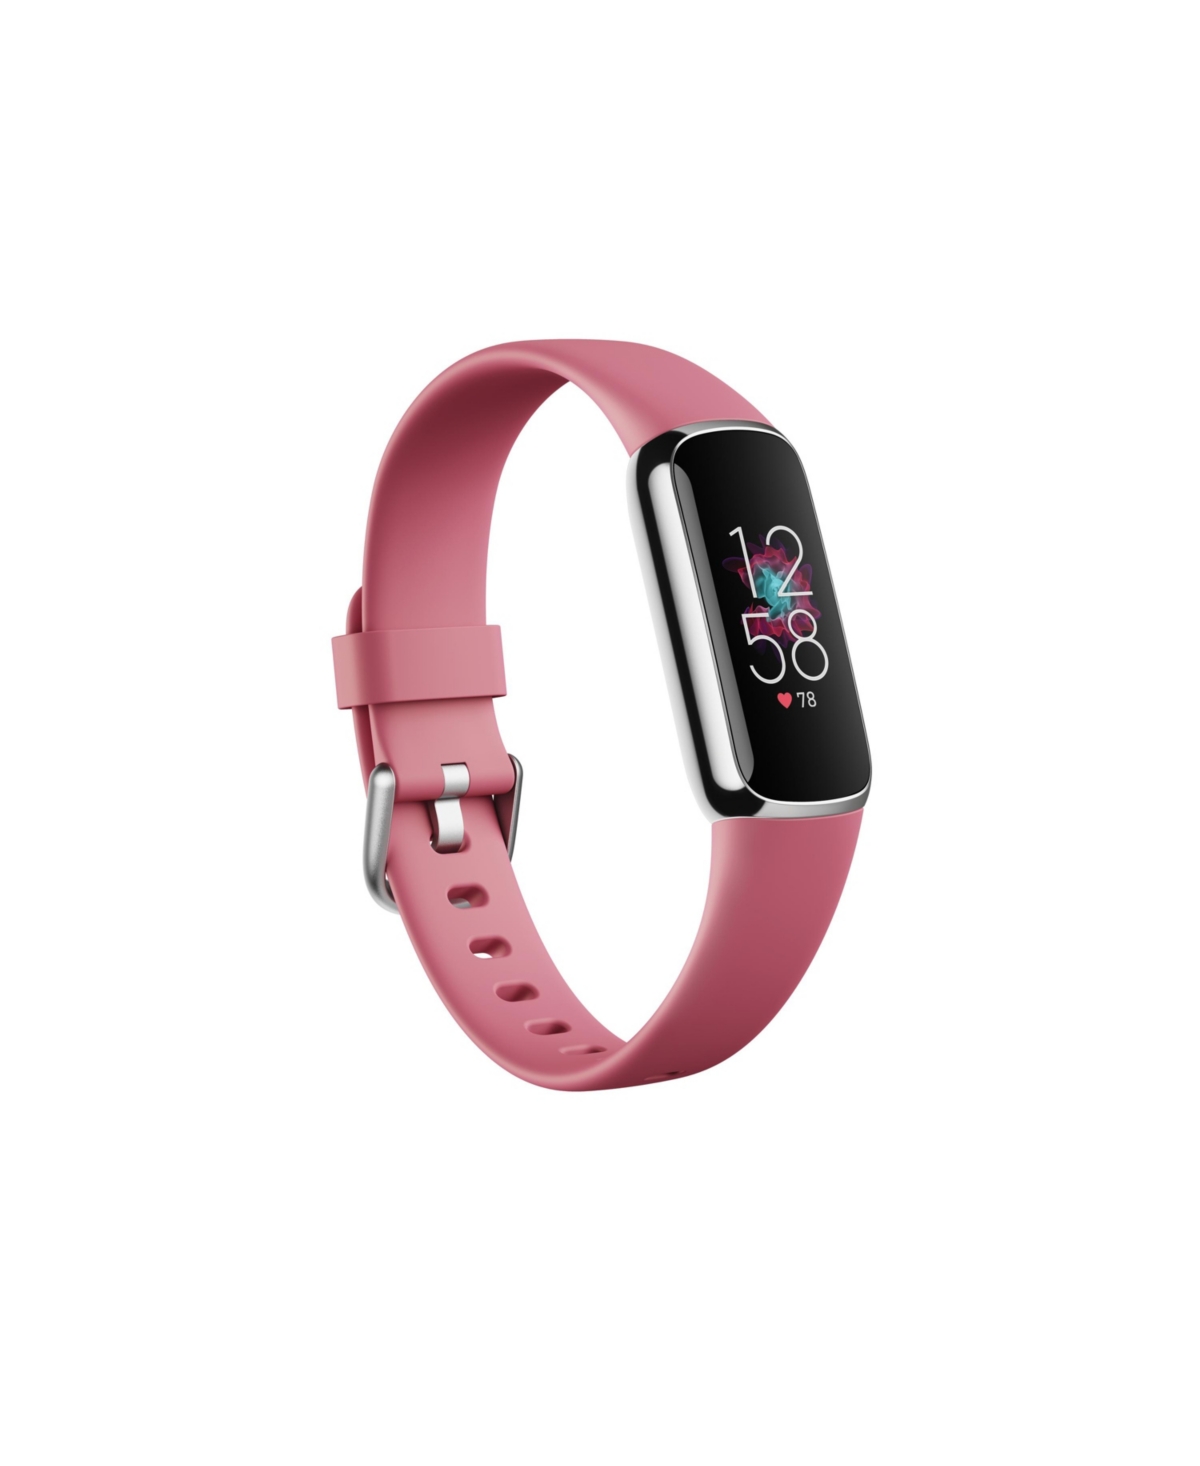 Fitbit Luxe Fitness Tracker in Platinum with Orchid Wrist Band